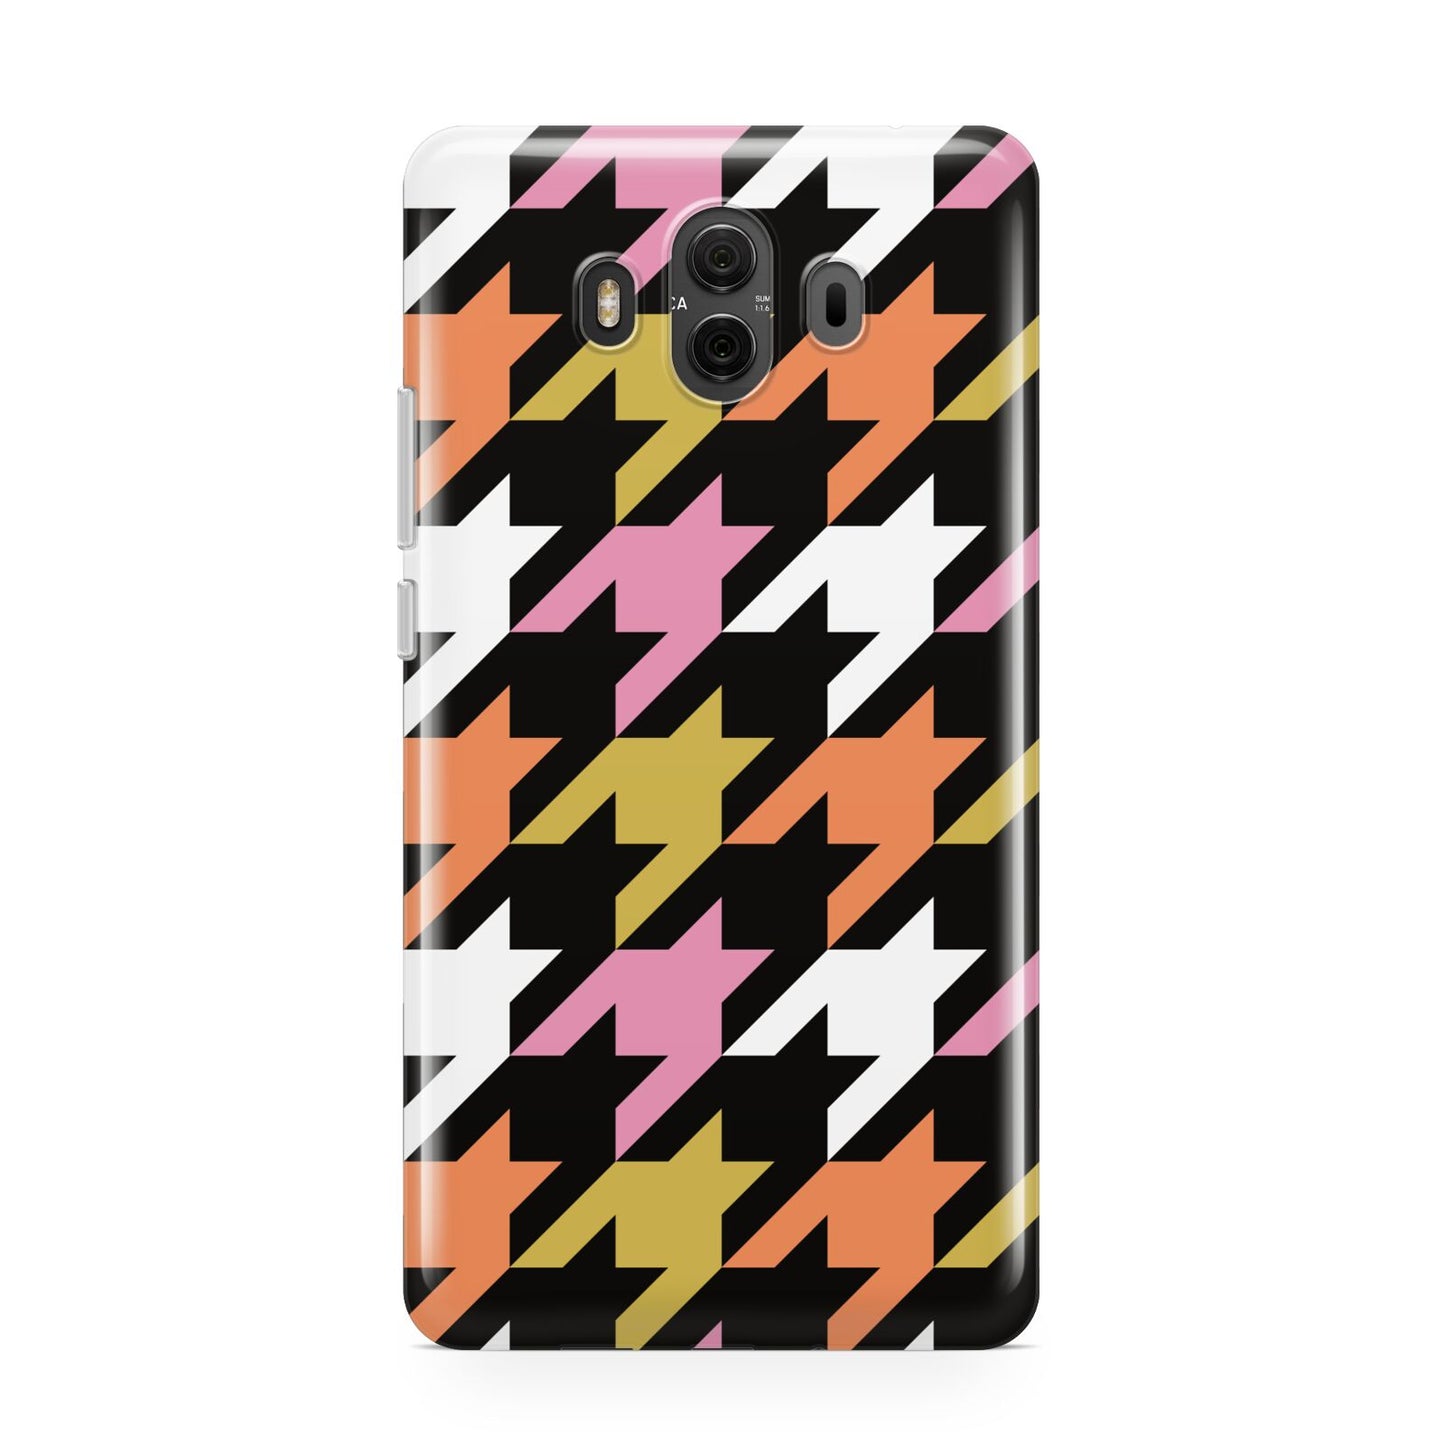 Retro Houndstooth Huawei Mate 10 Protective Phone Case